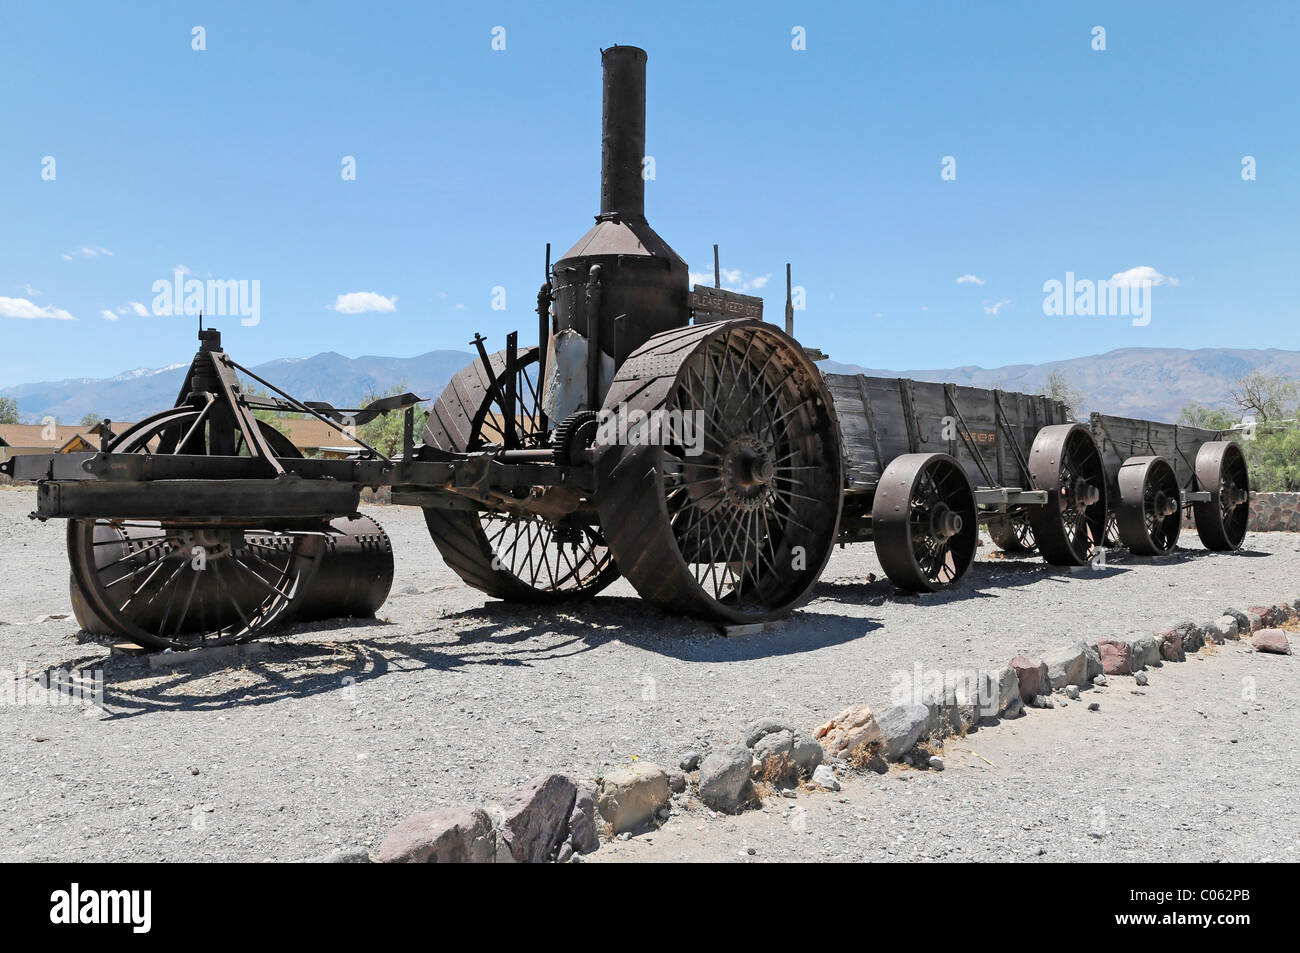 OLD DINAH 1894, Death Valley National Park, California, USA, North America Stock Photo